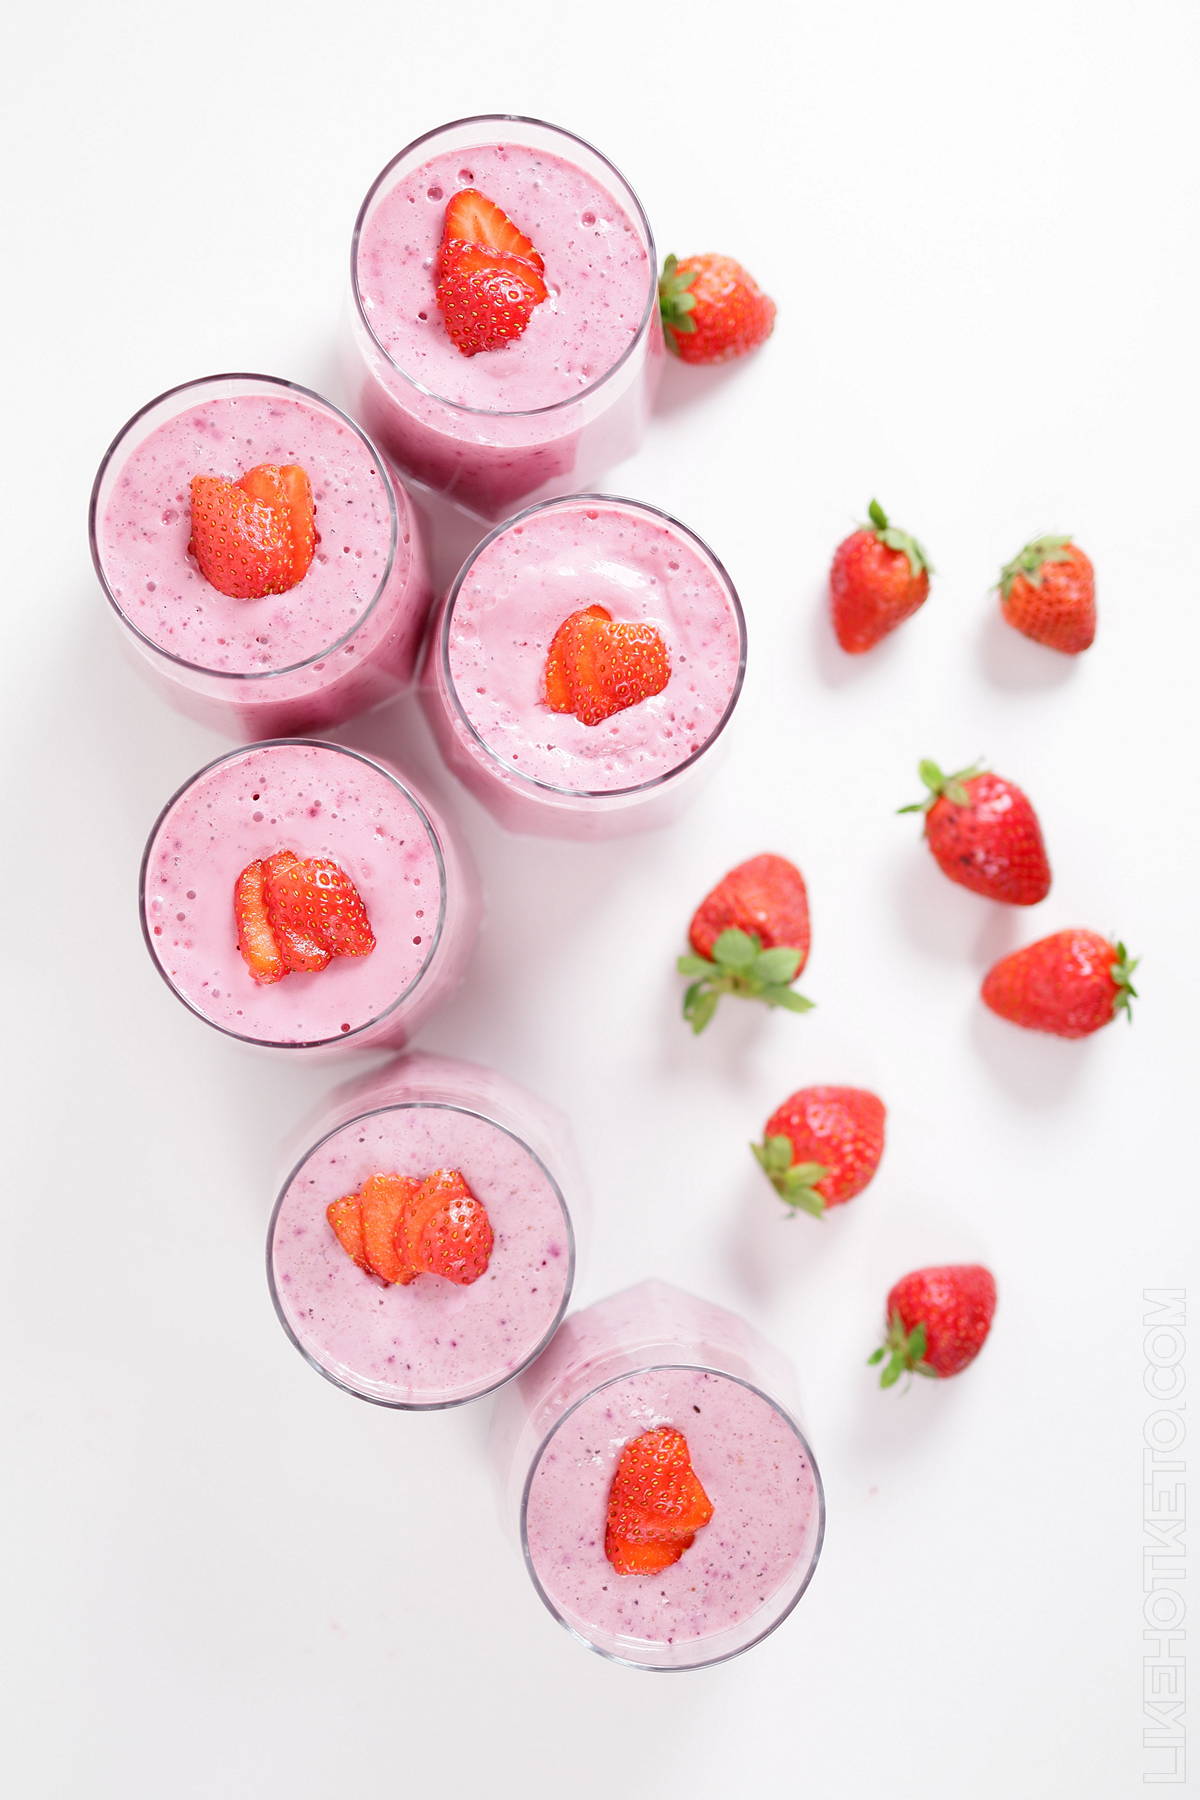 Keto natural gelatin and yogurt mousse with strawberries in glasses.